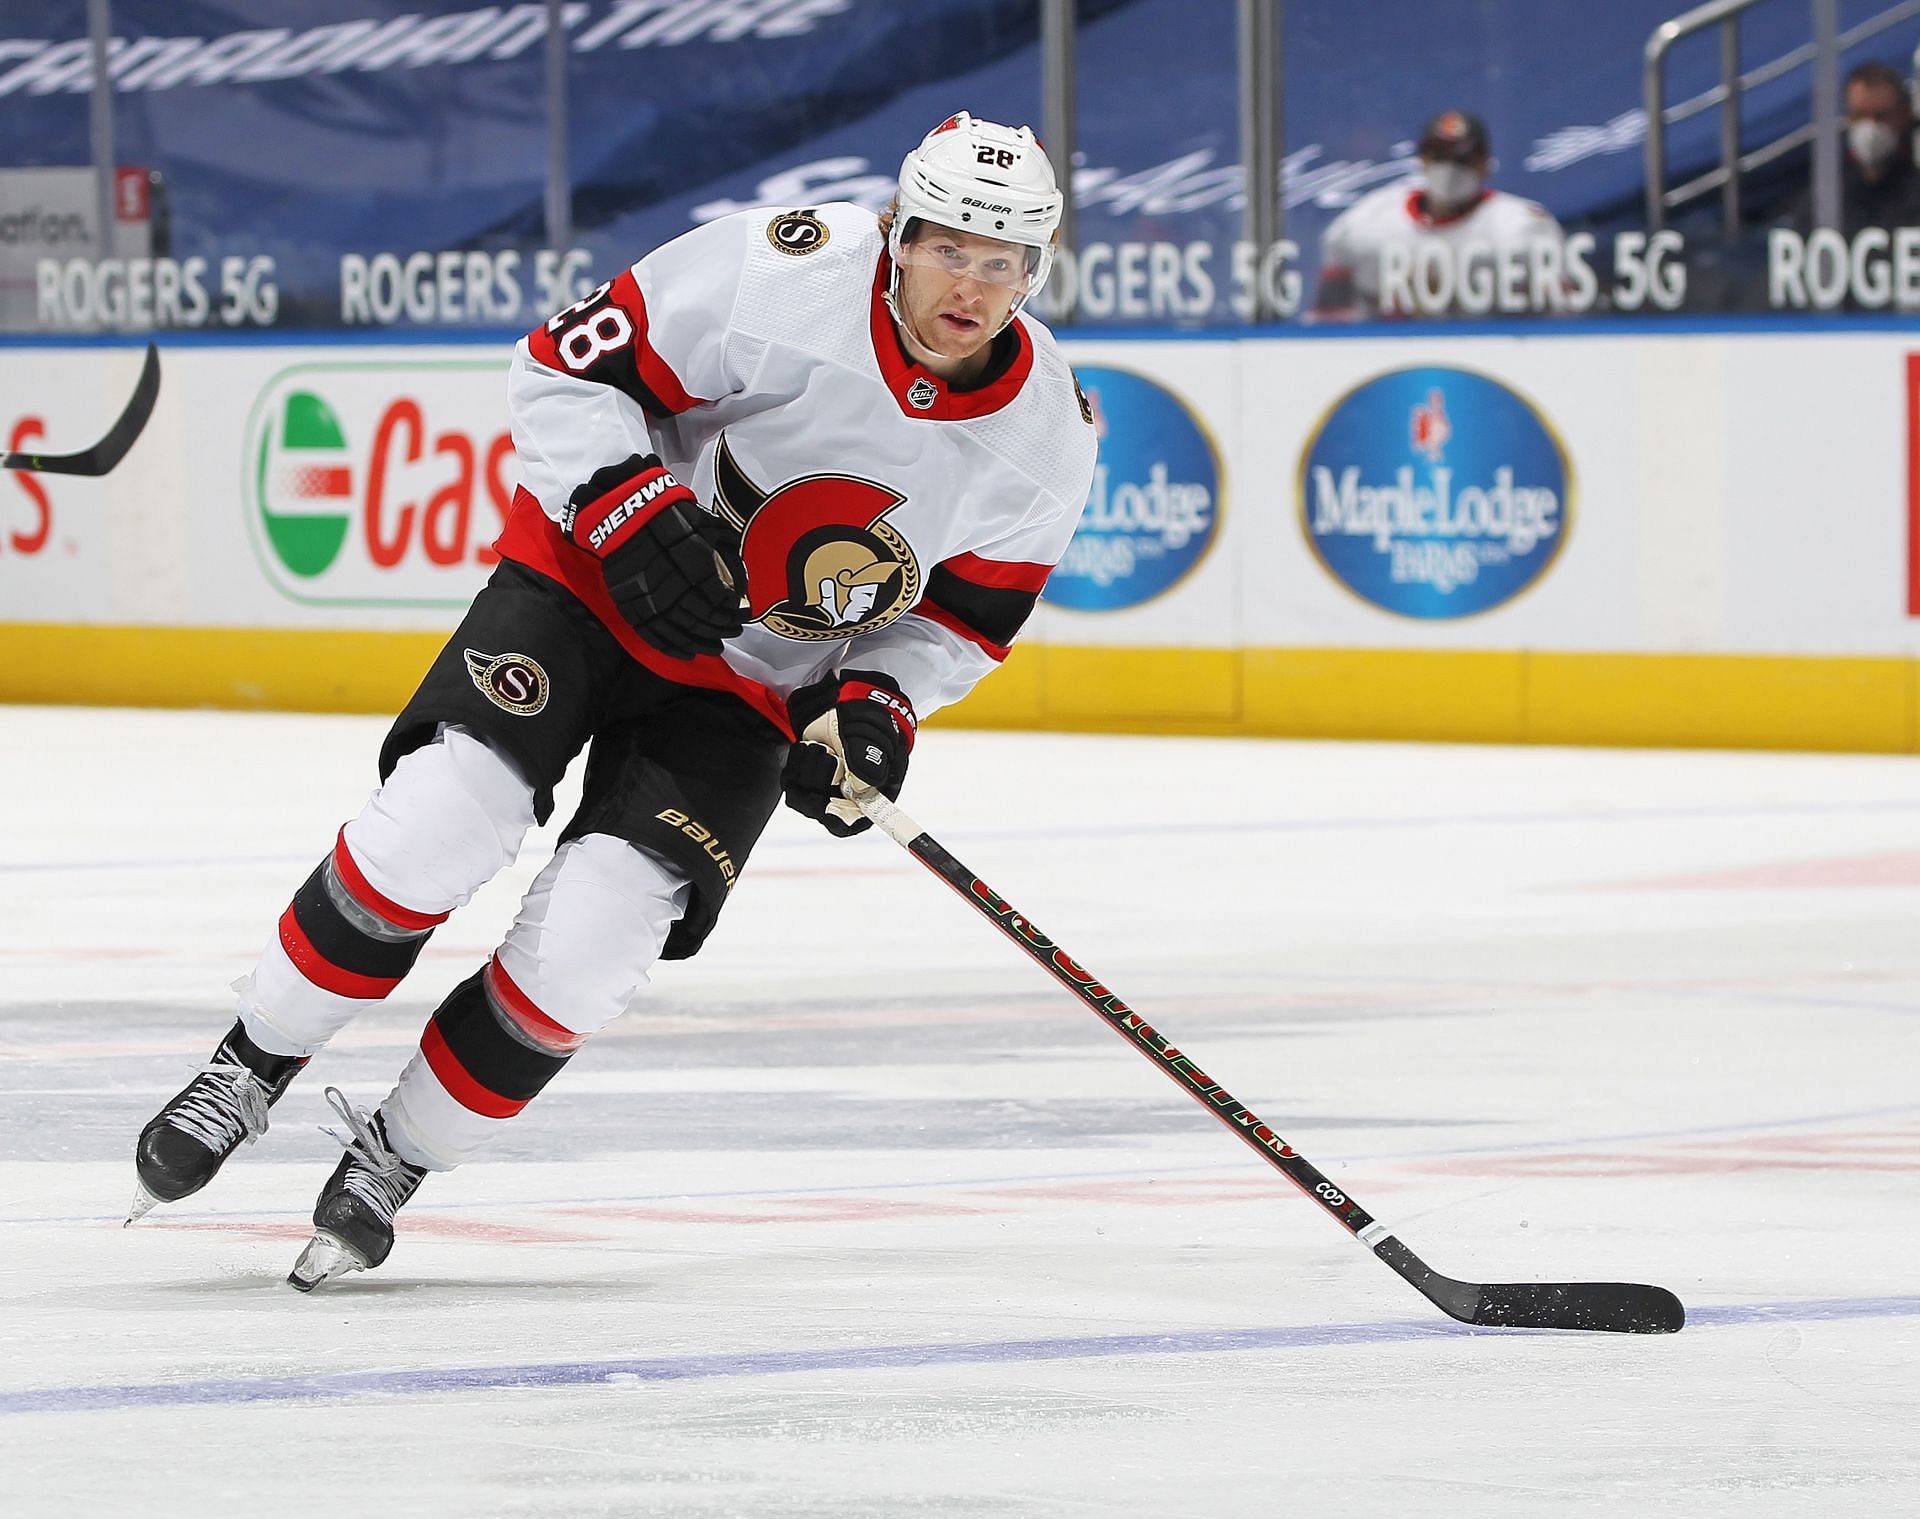 2023-2024 Fantasy Hockey Preview: Sleepers